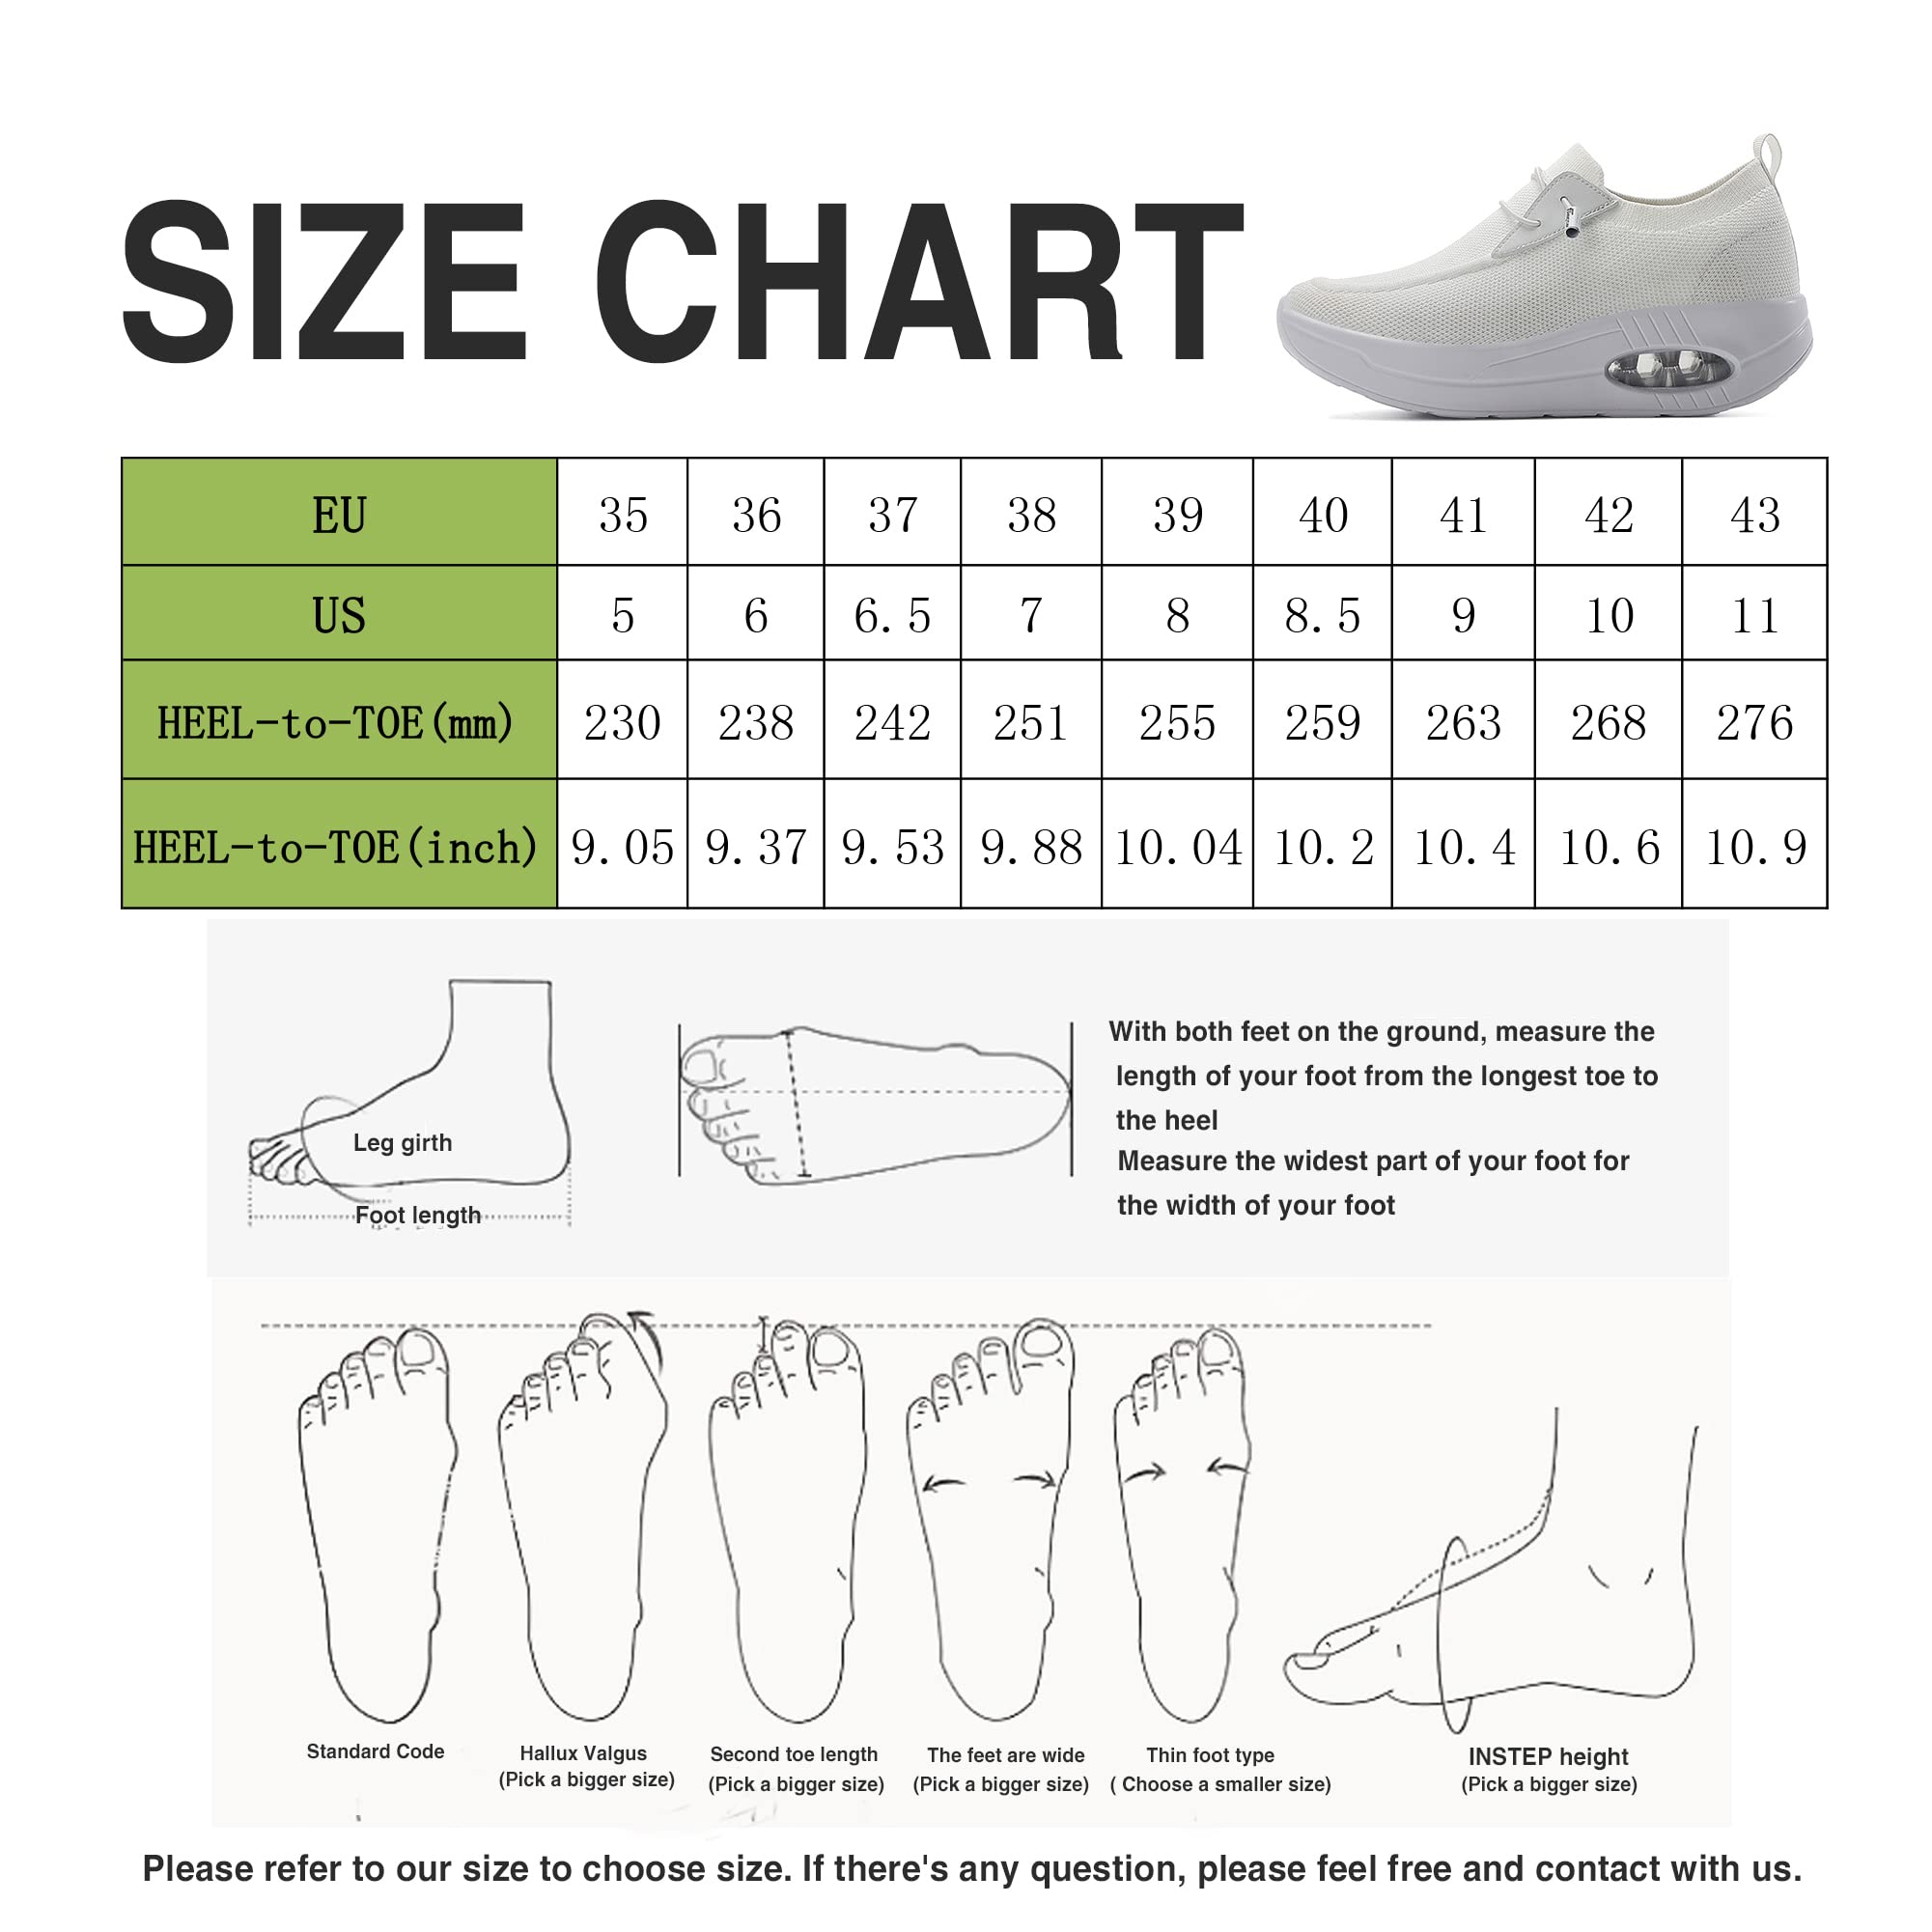 AUUGK White Women's Slip-on Walking Shoes Mesh Breathe Air Cushion Arch Support Sock Sneakers for Women Ladys Girls Fashion Platform Lightweight Loafers Non-Slip Nursing Work Running Shoes Size10